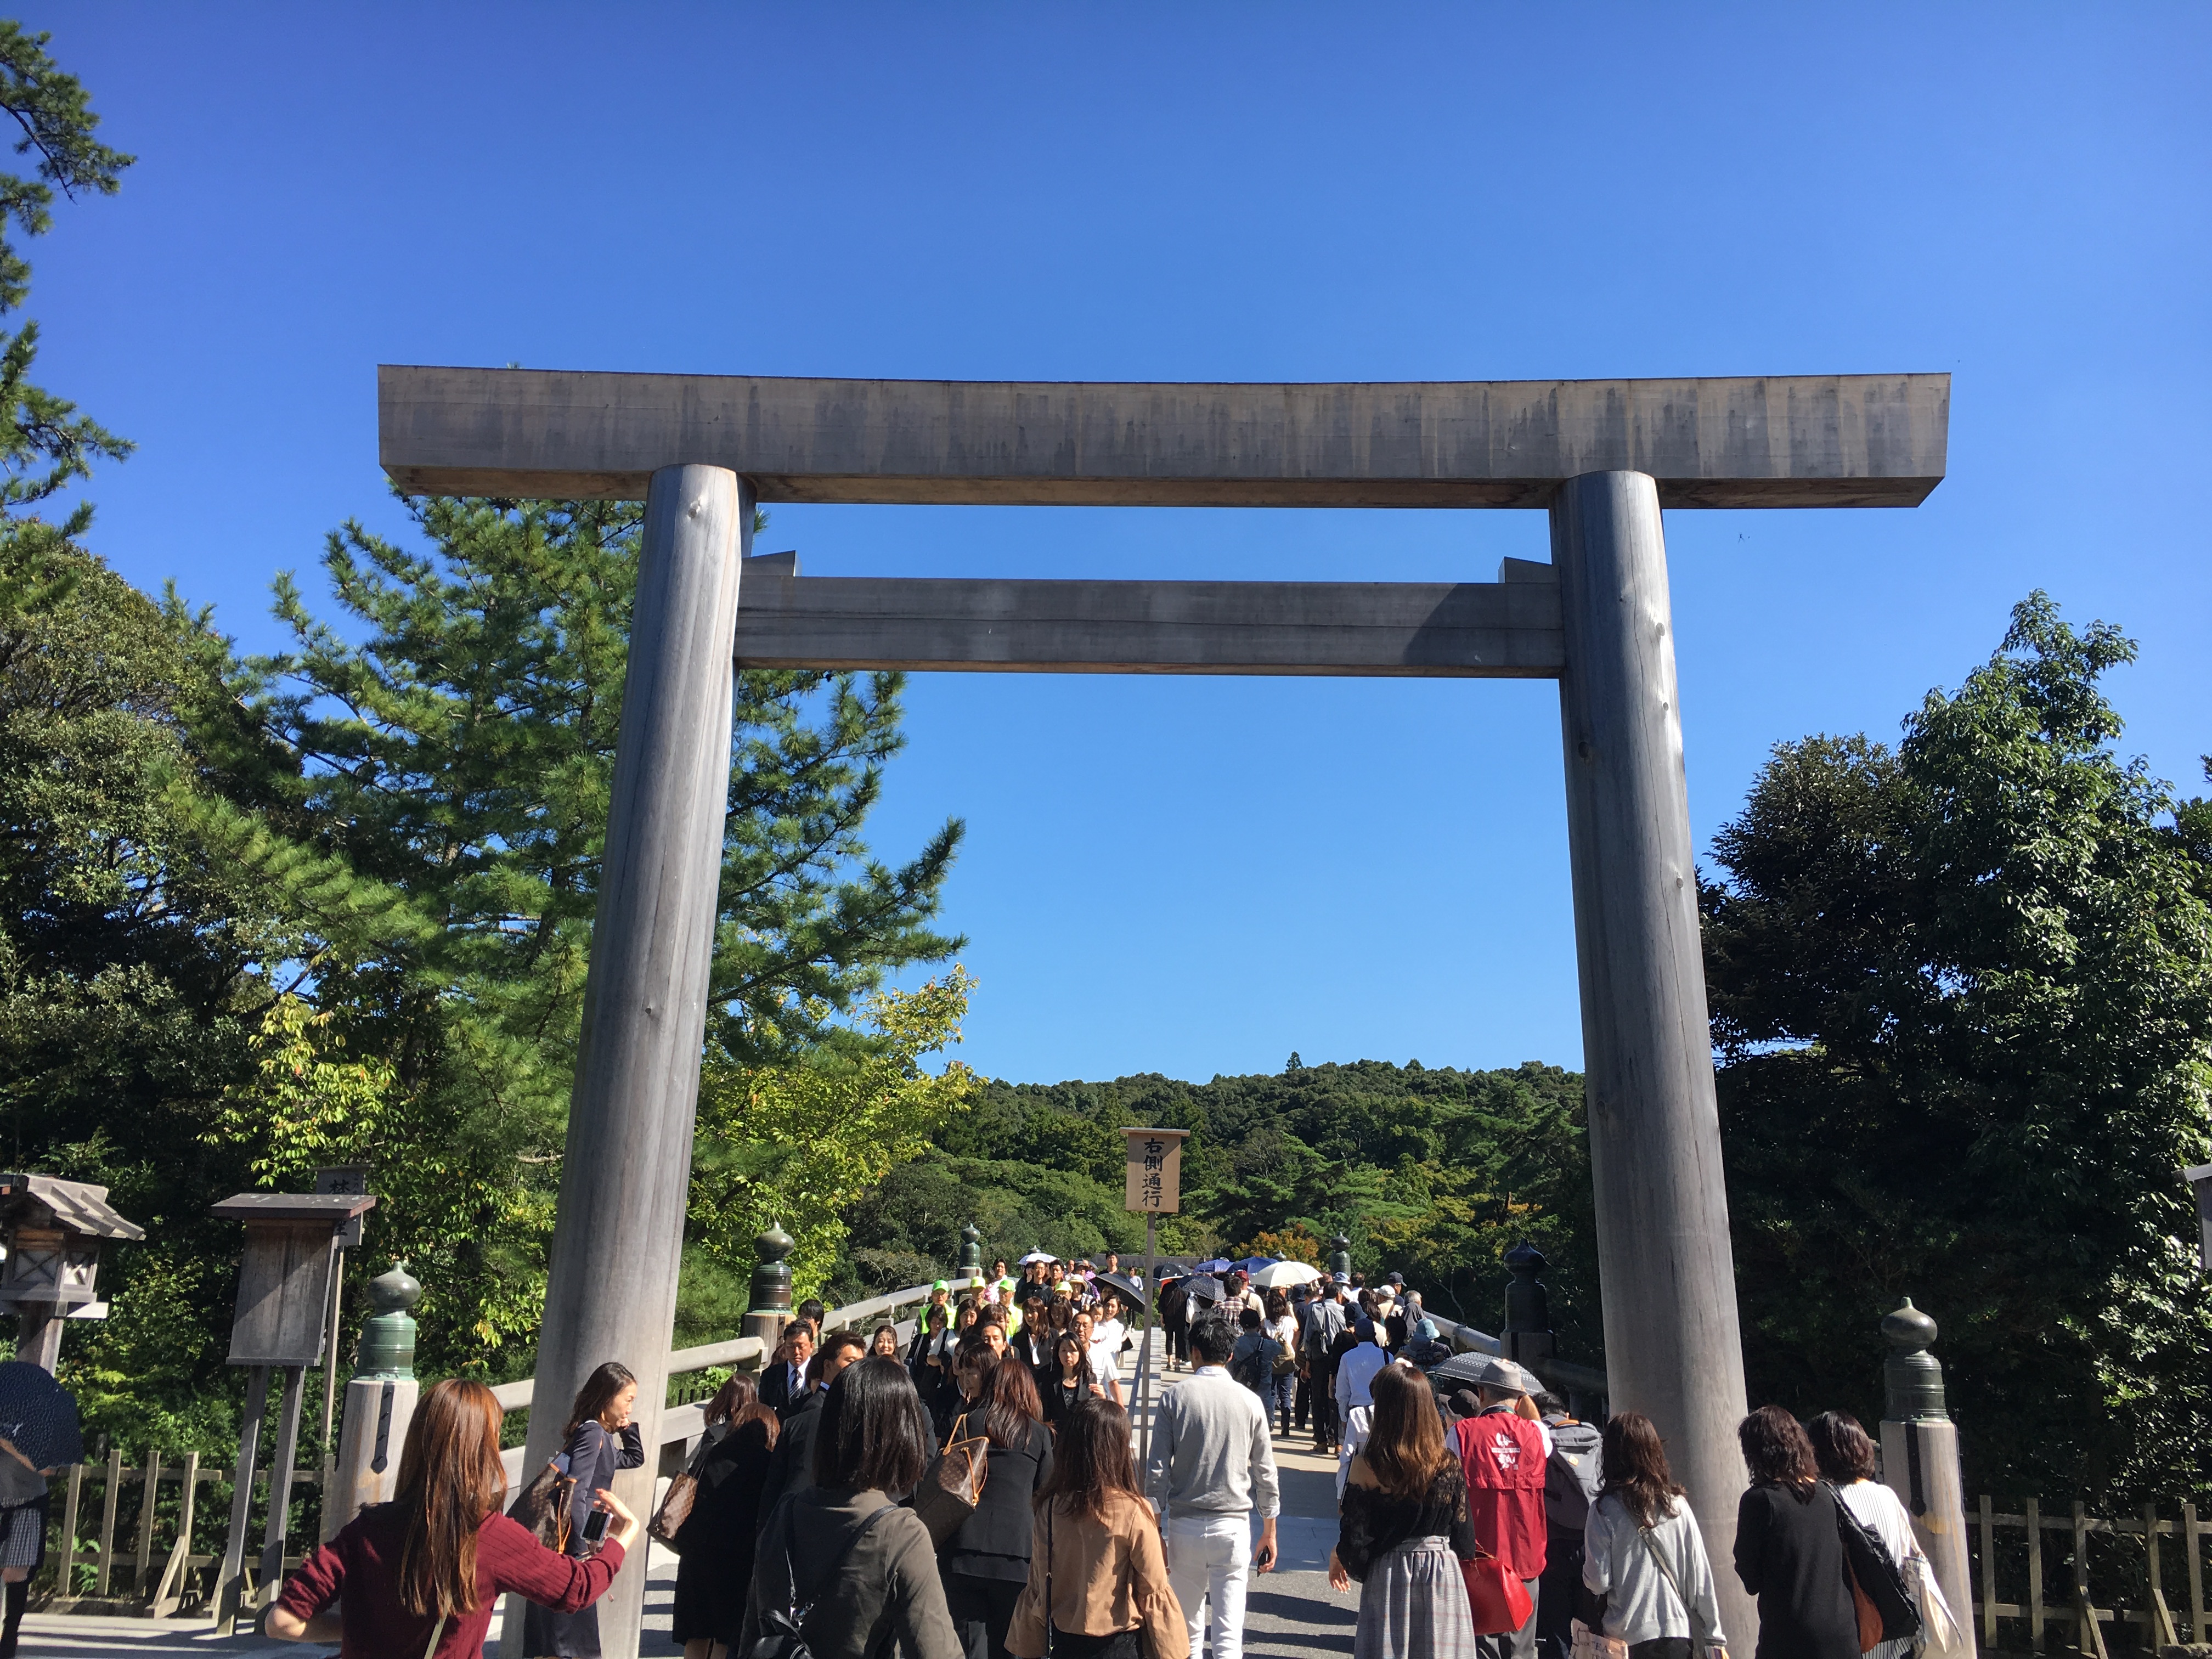 Uji-bashi bridge in Ise Grand Shrine as tourists walk over it during the day